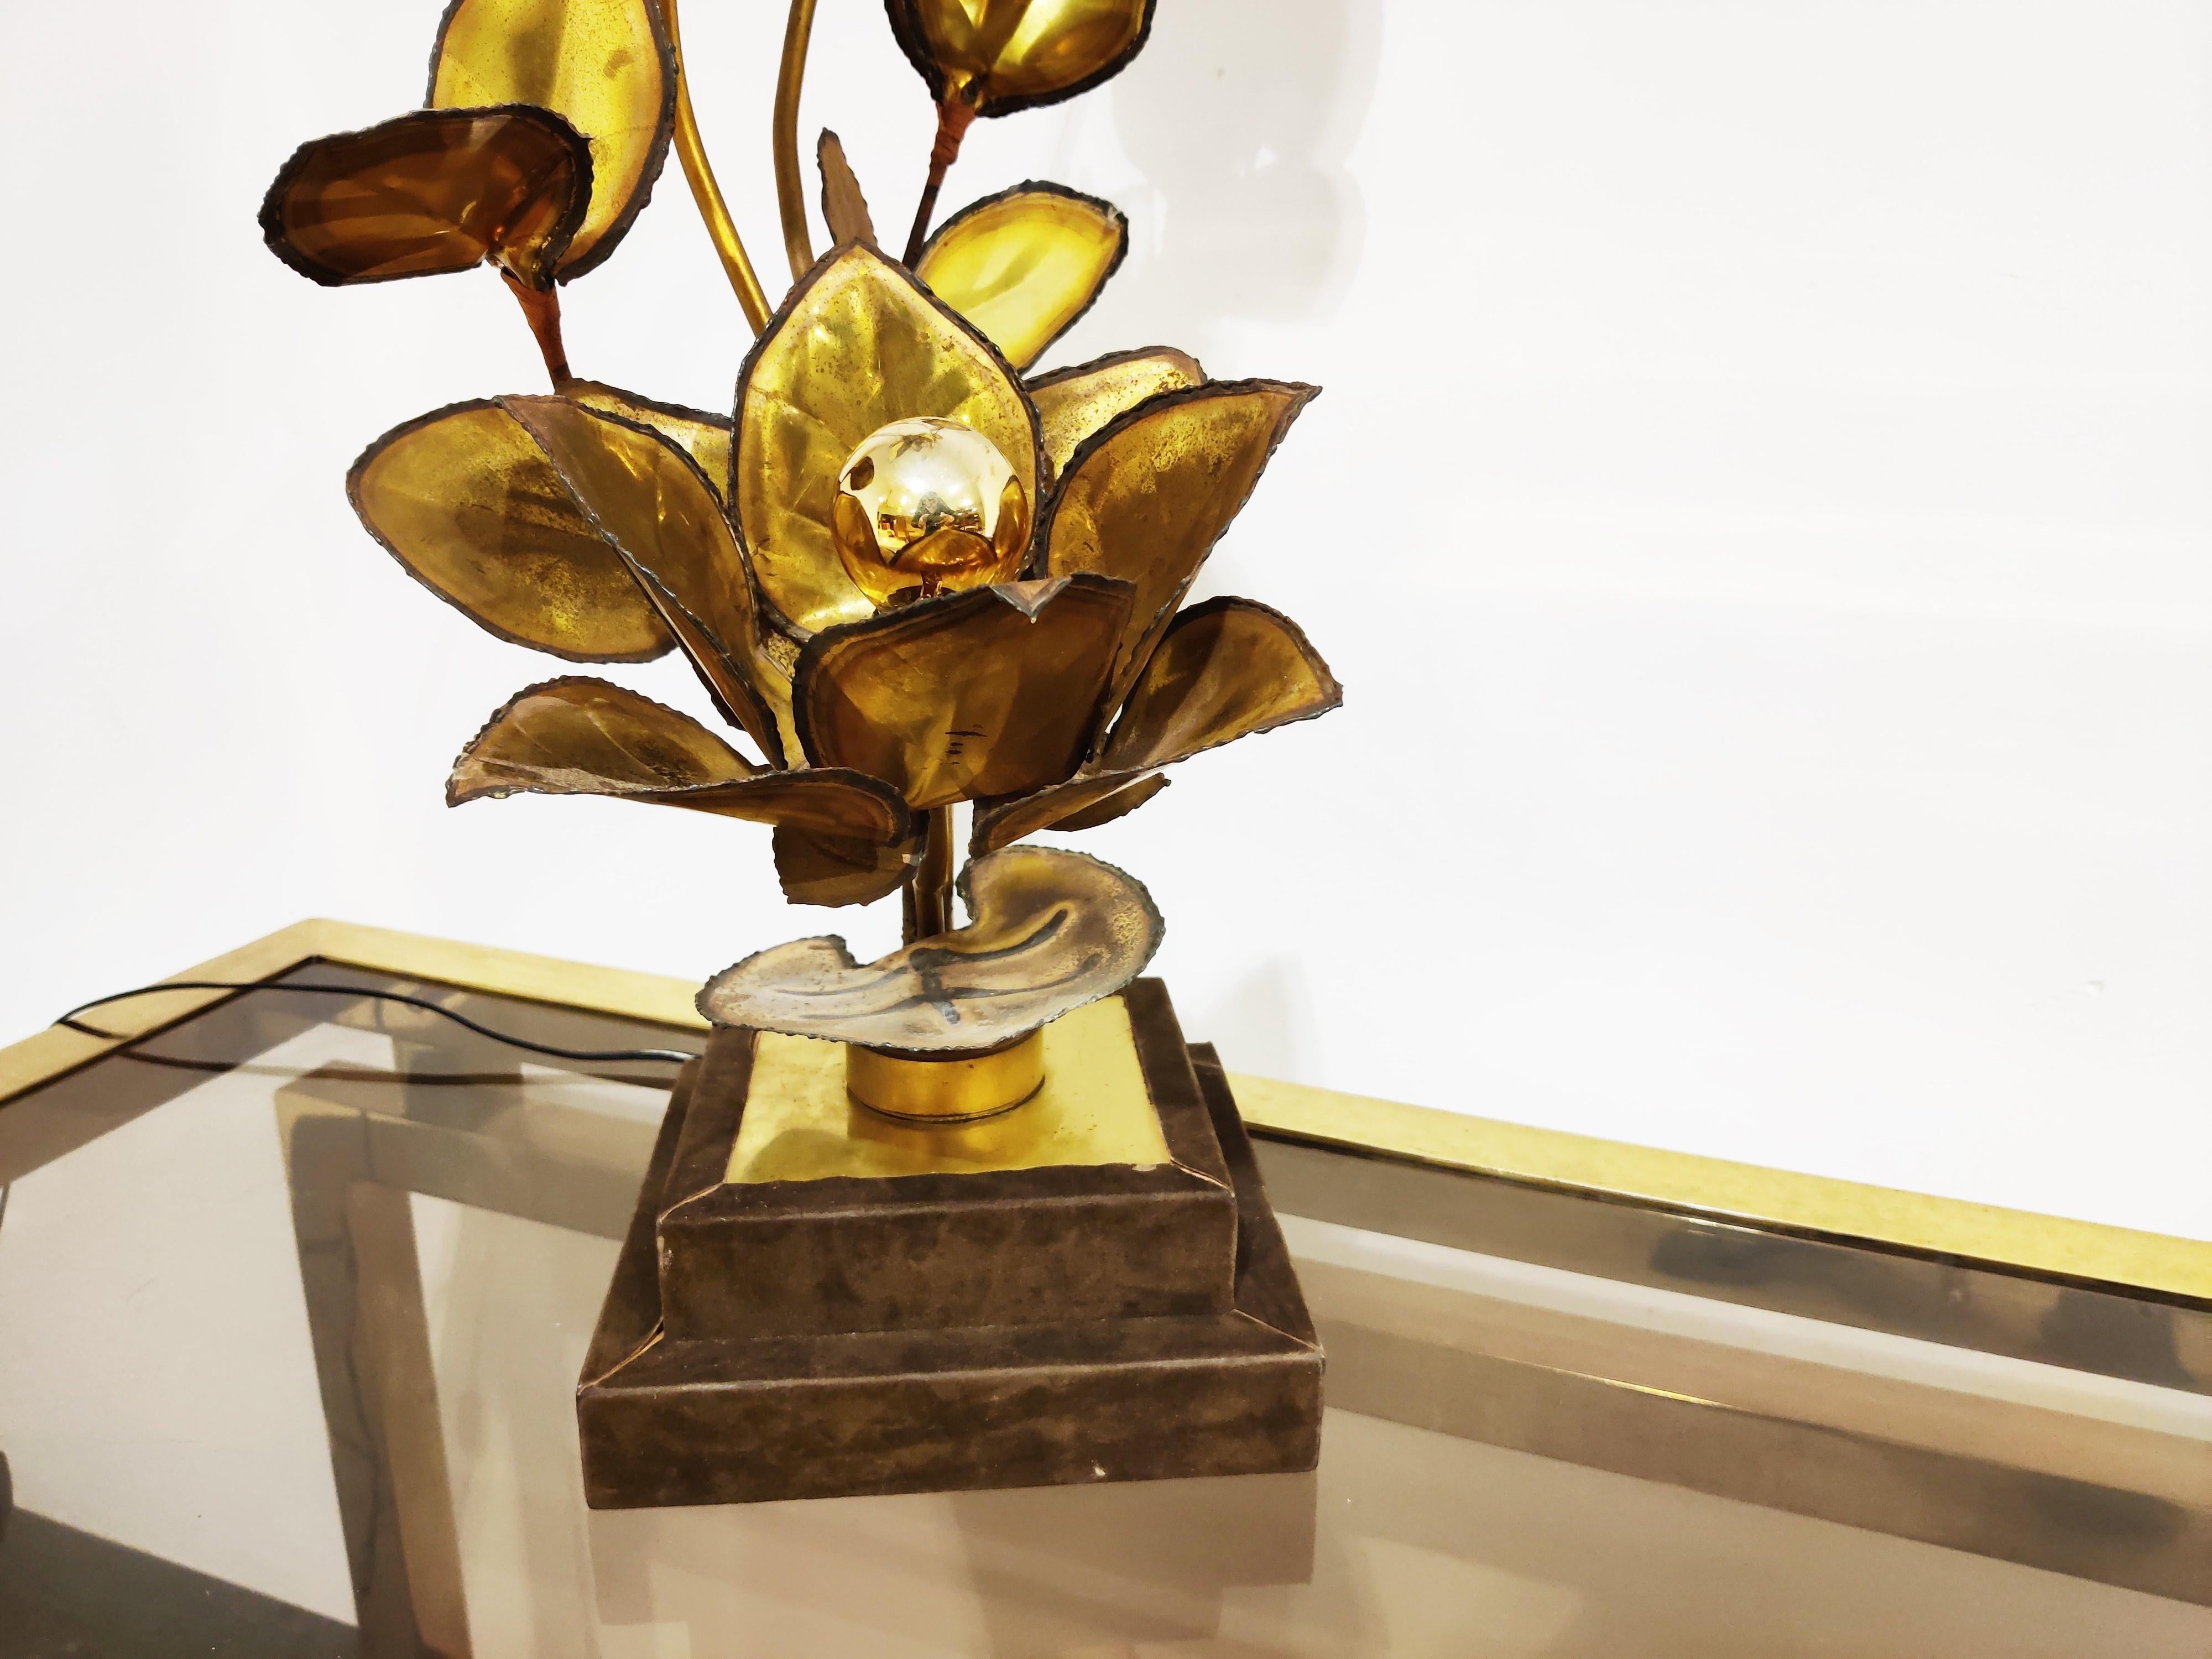 Beautiful torch cut brass floor or table lamp by Maison Jansen.

This flower lamp has three light points and emits a beautiful warm light.

Good original condition with patina, tested and ready to use.

The lamp has a brown velvet